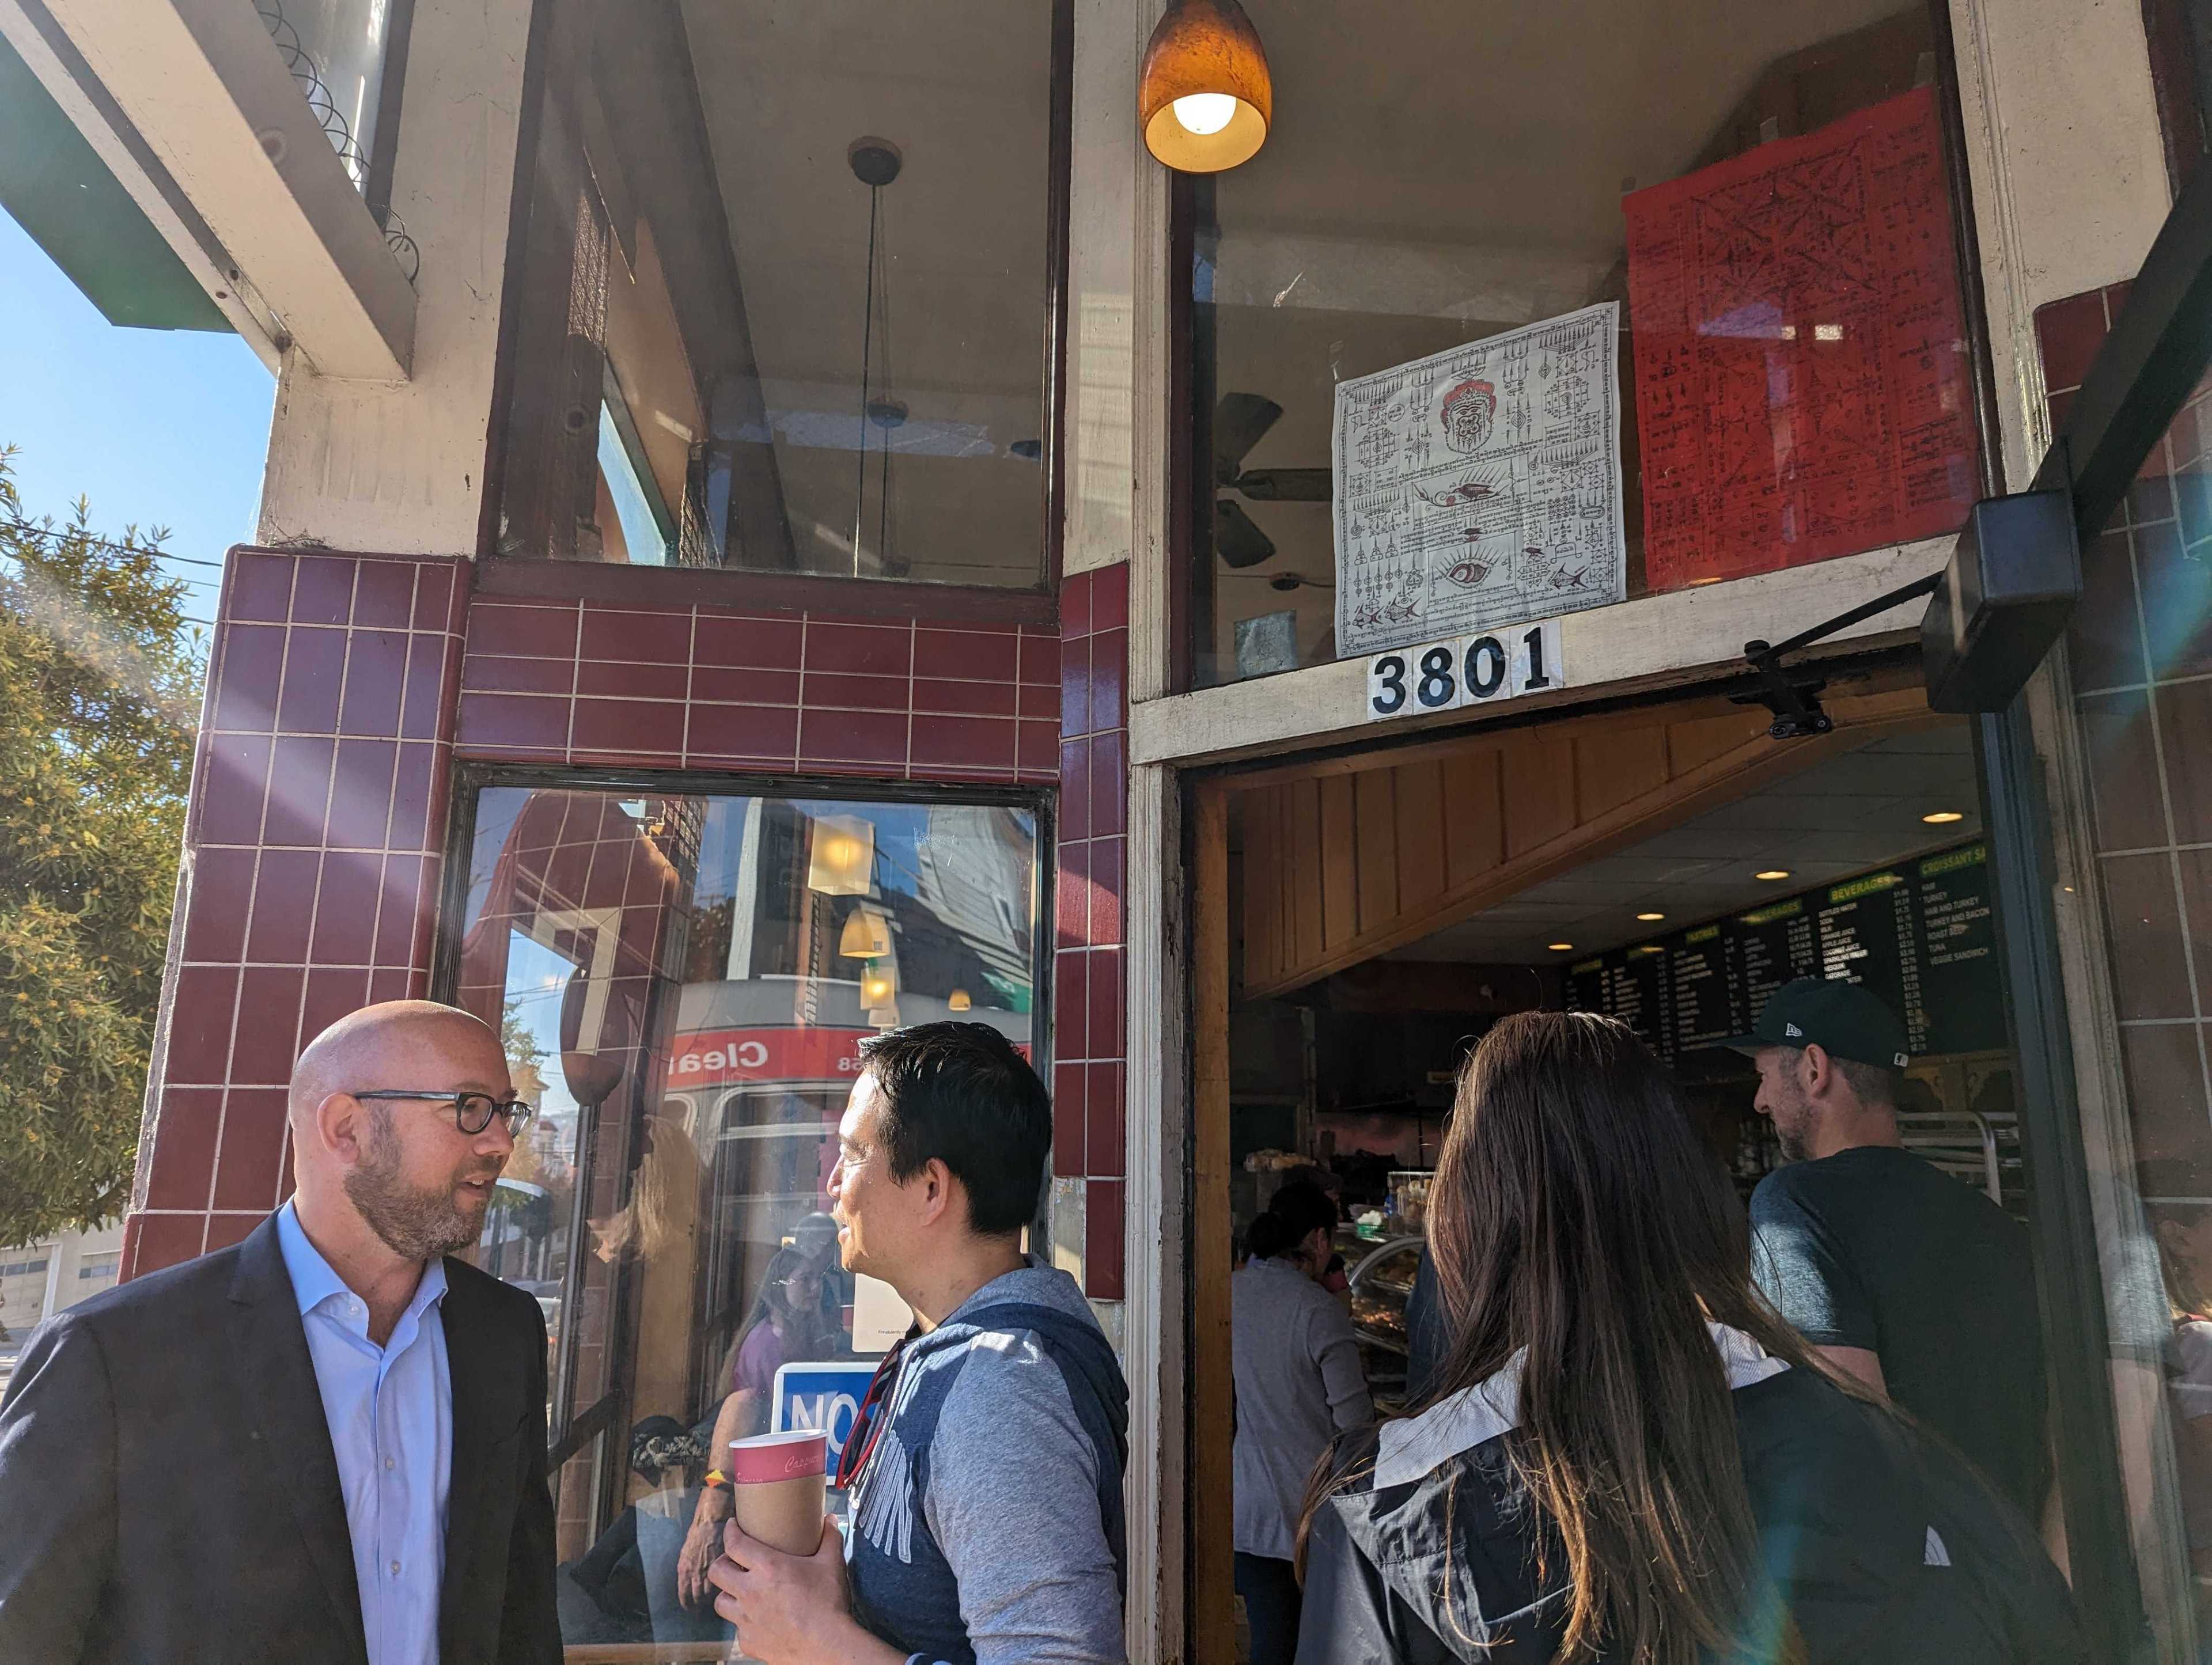 San Francisco Supervisor Rafael Mandelman speaks with a district resident Wednesday as a line to enter forms outside Happy Donuts in Noe Valley.